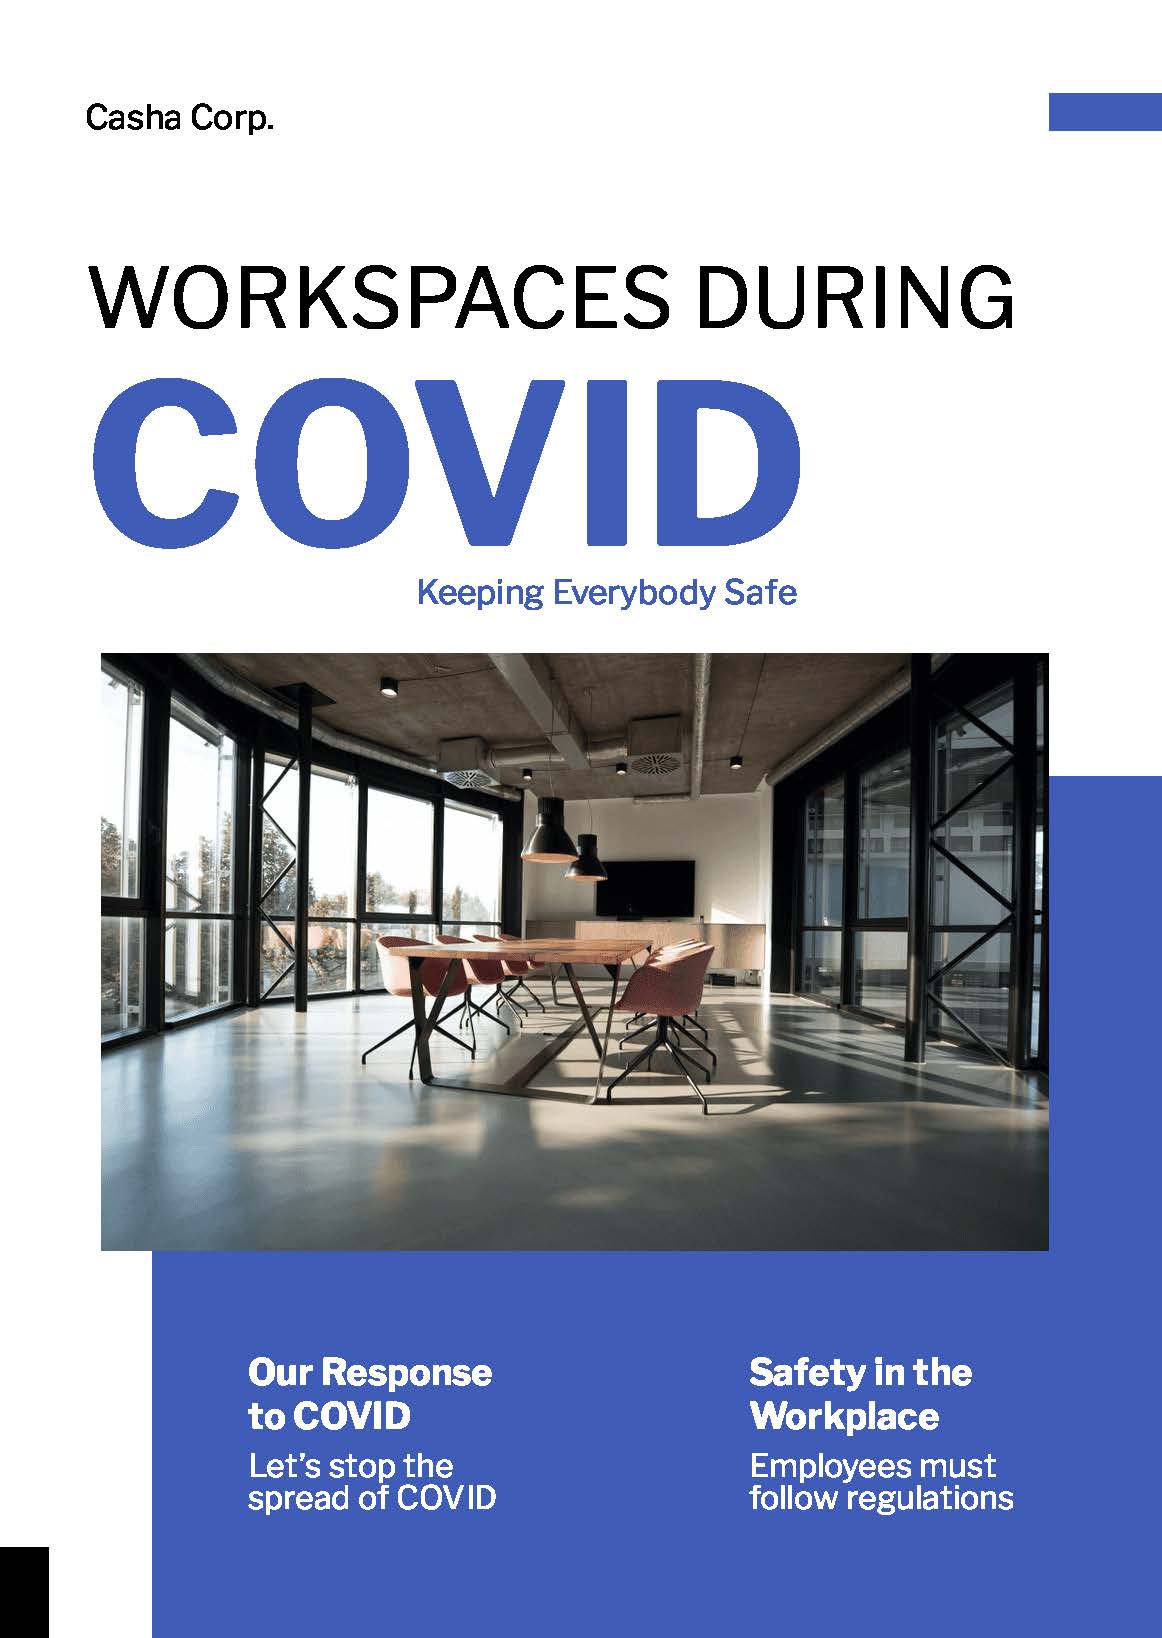 Free Workspaces During COVID Booklet Template in Word, Google Docs, Illustrator, PSD, Publisher